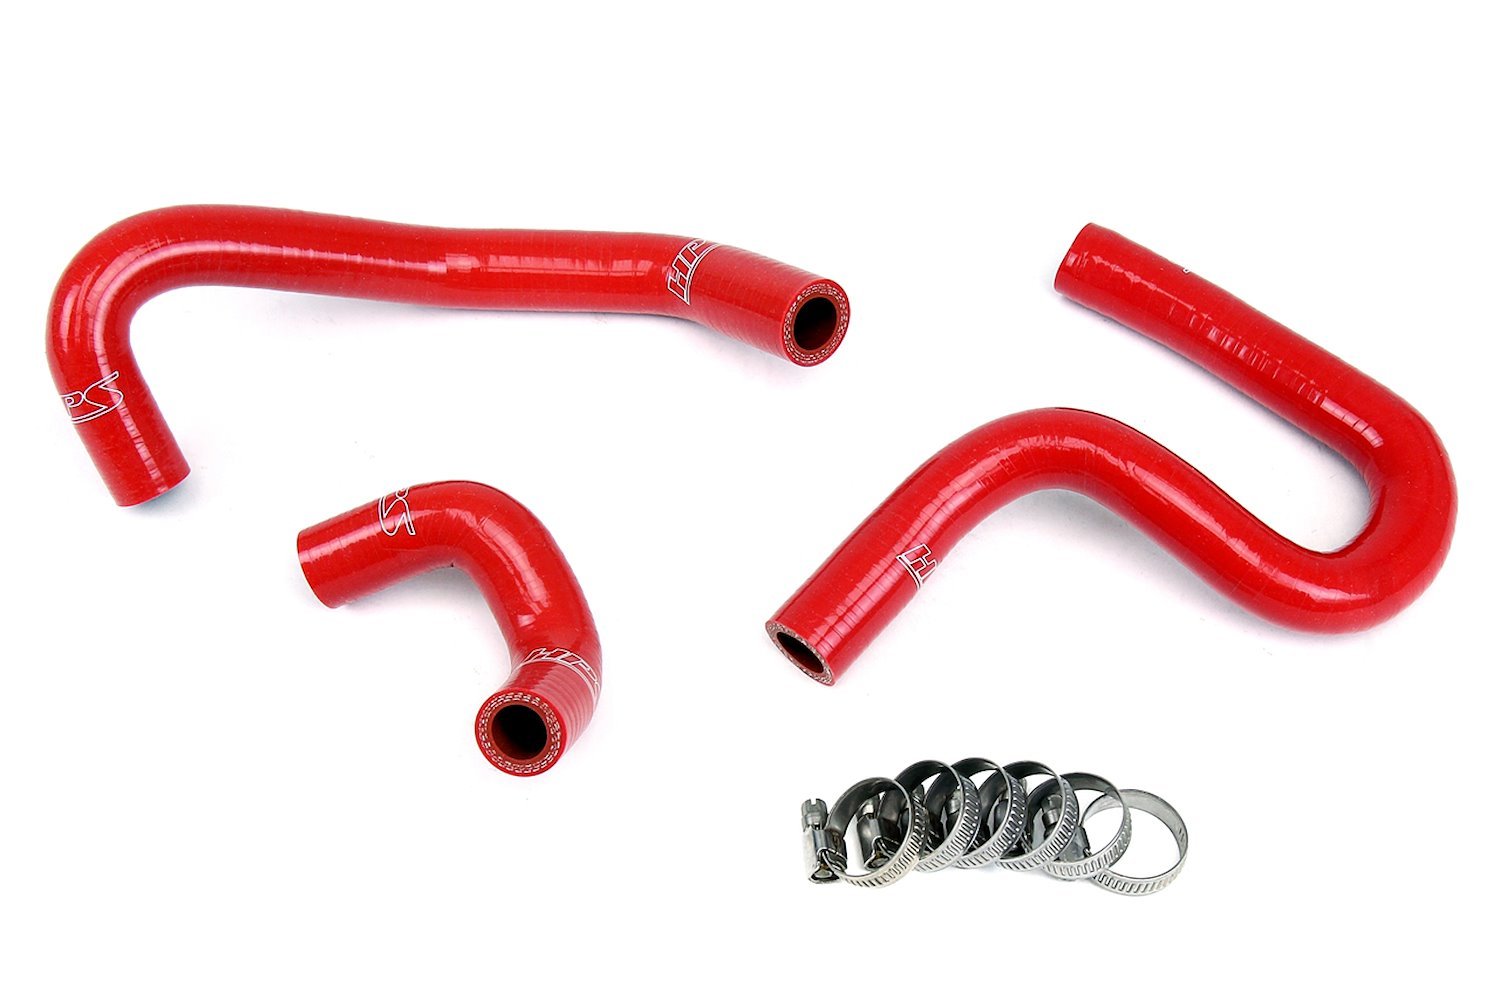 57-1763-RED Heater Hose Kit, 3-Ply Reinforced Silicone, Replaces Rubber Heater Coolant Hoses